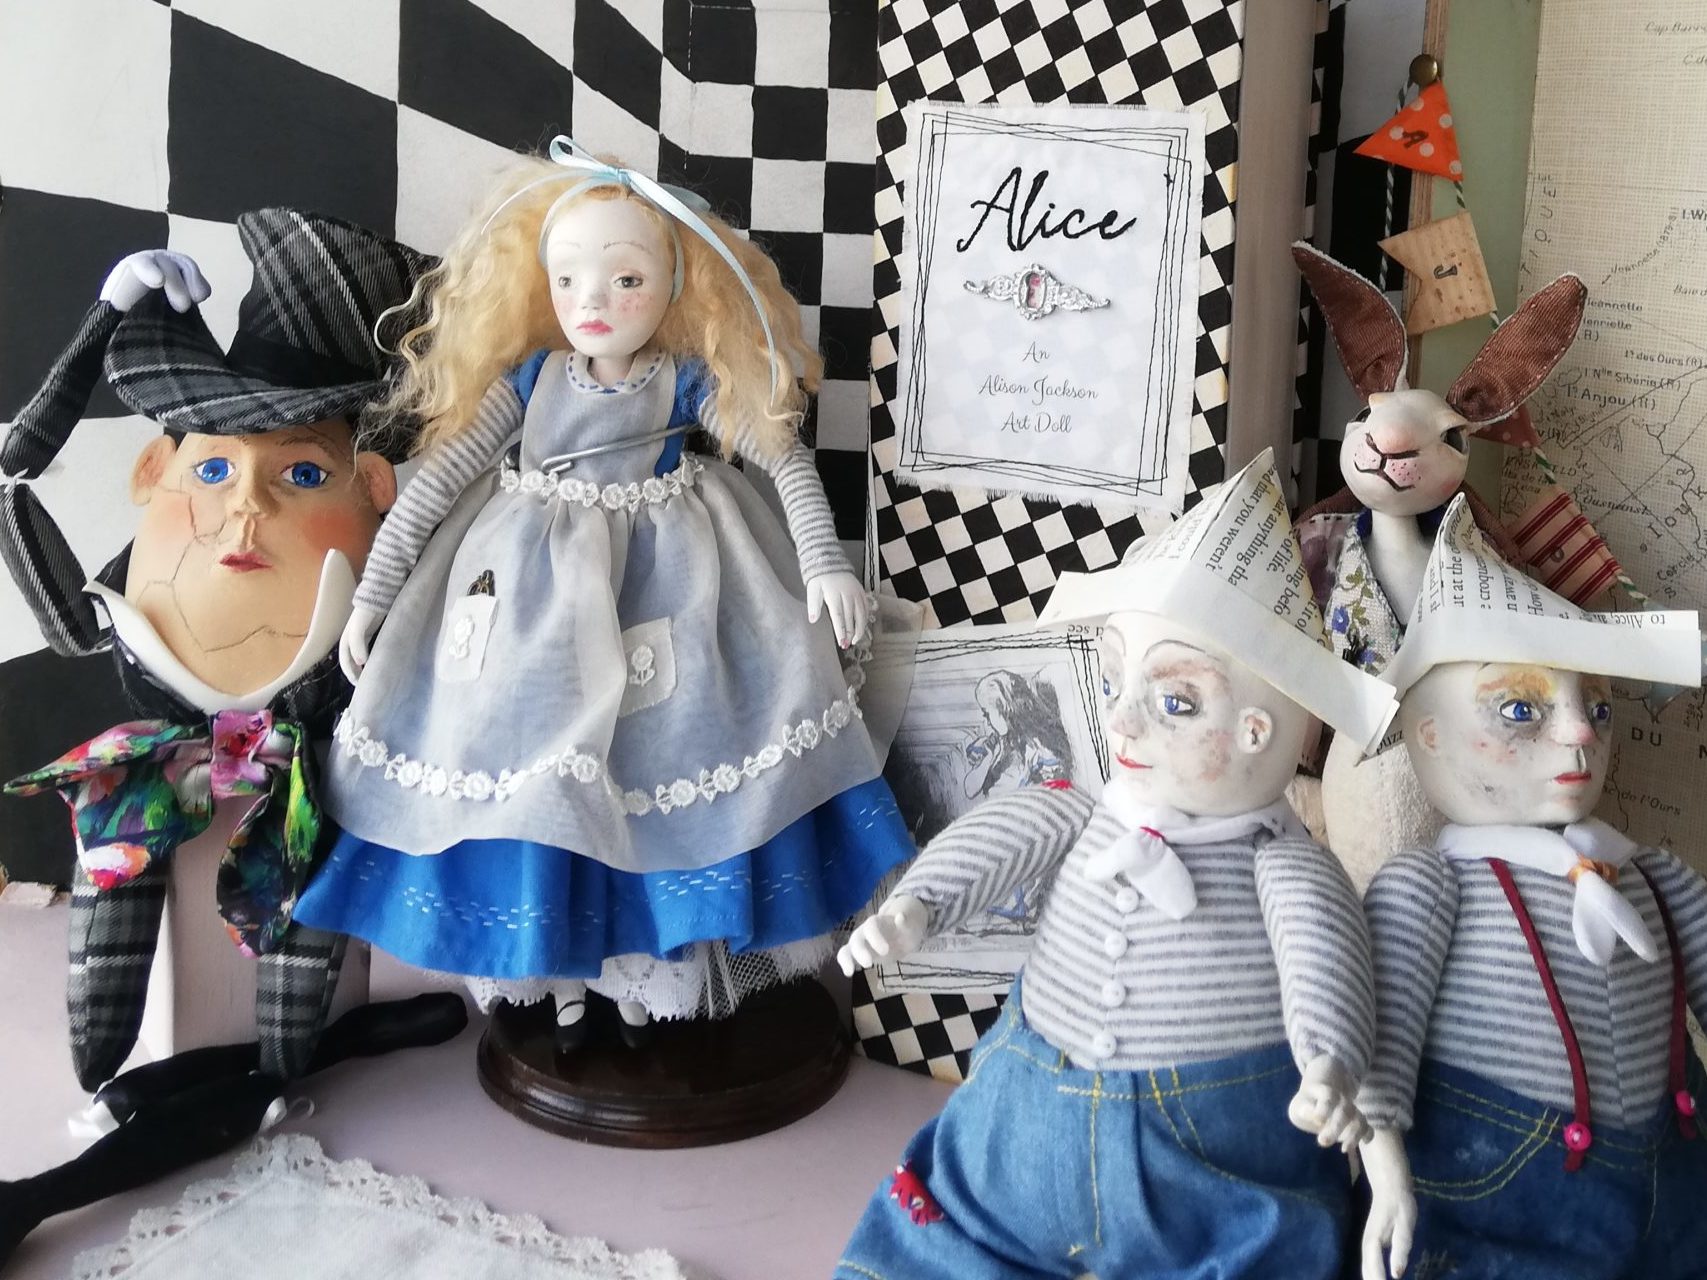 Alice art doll and her friends
